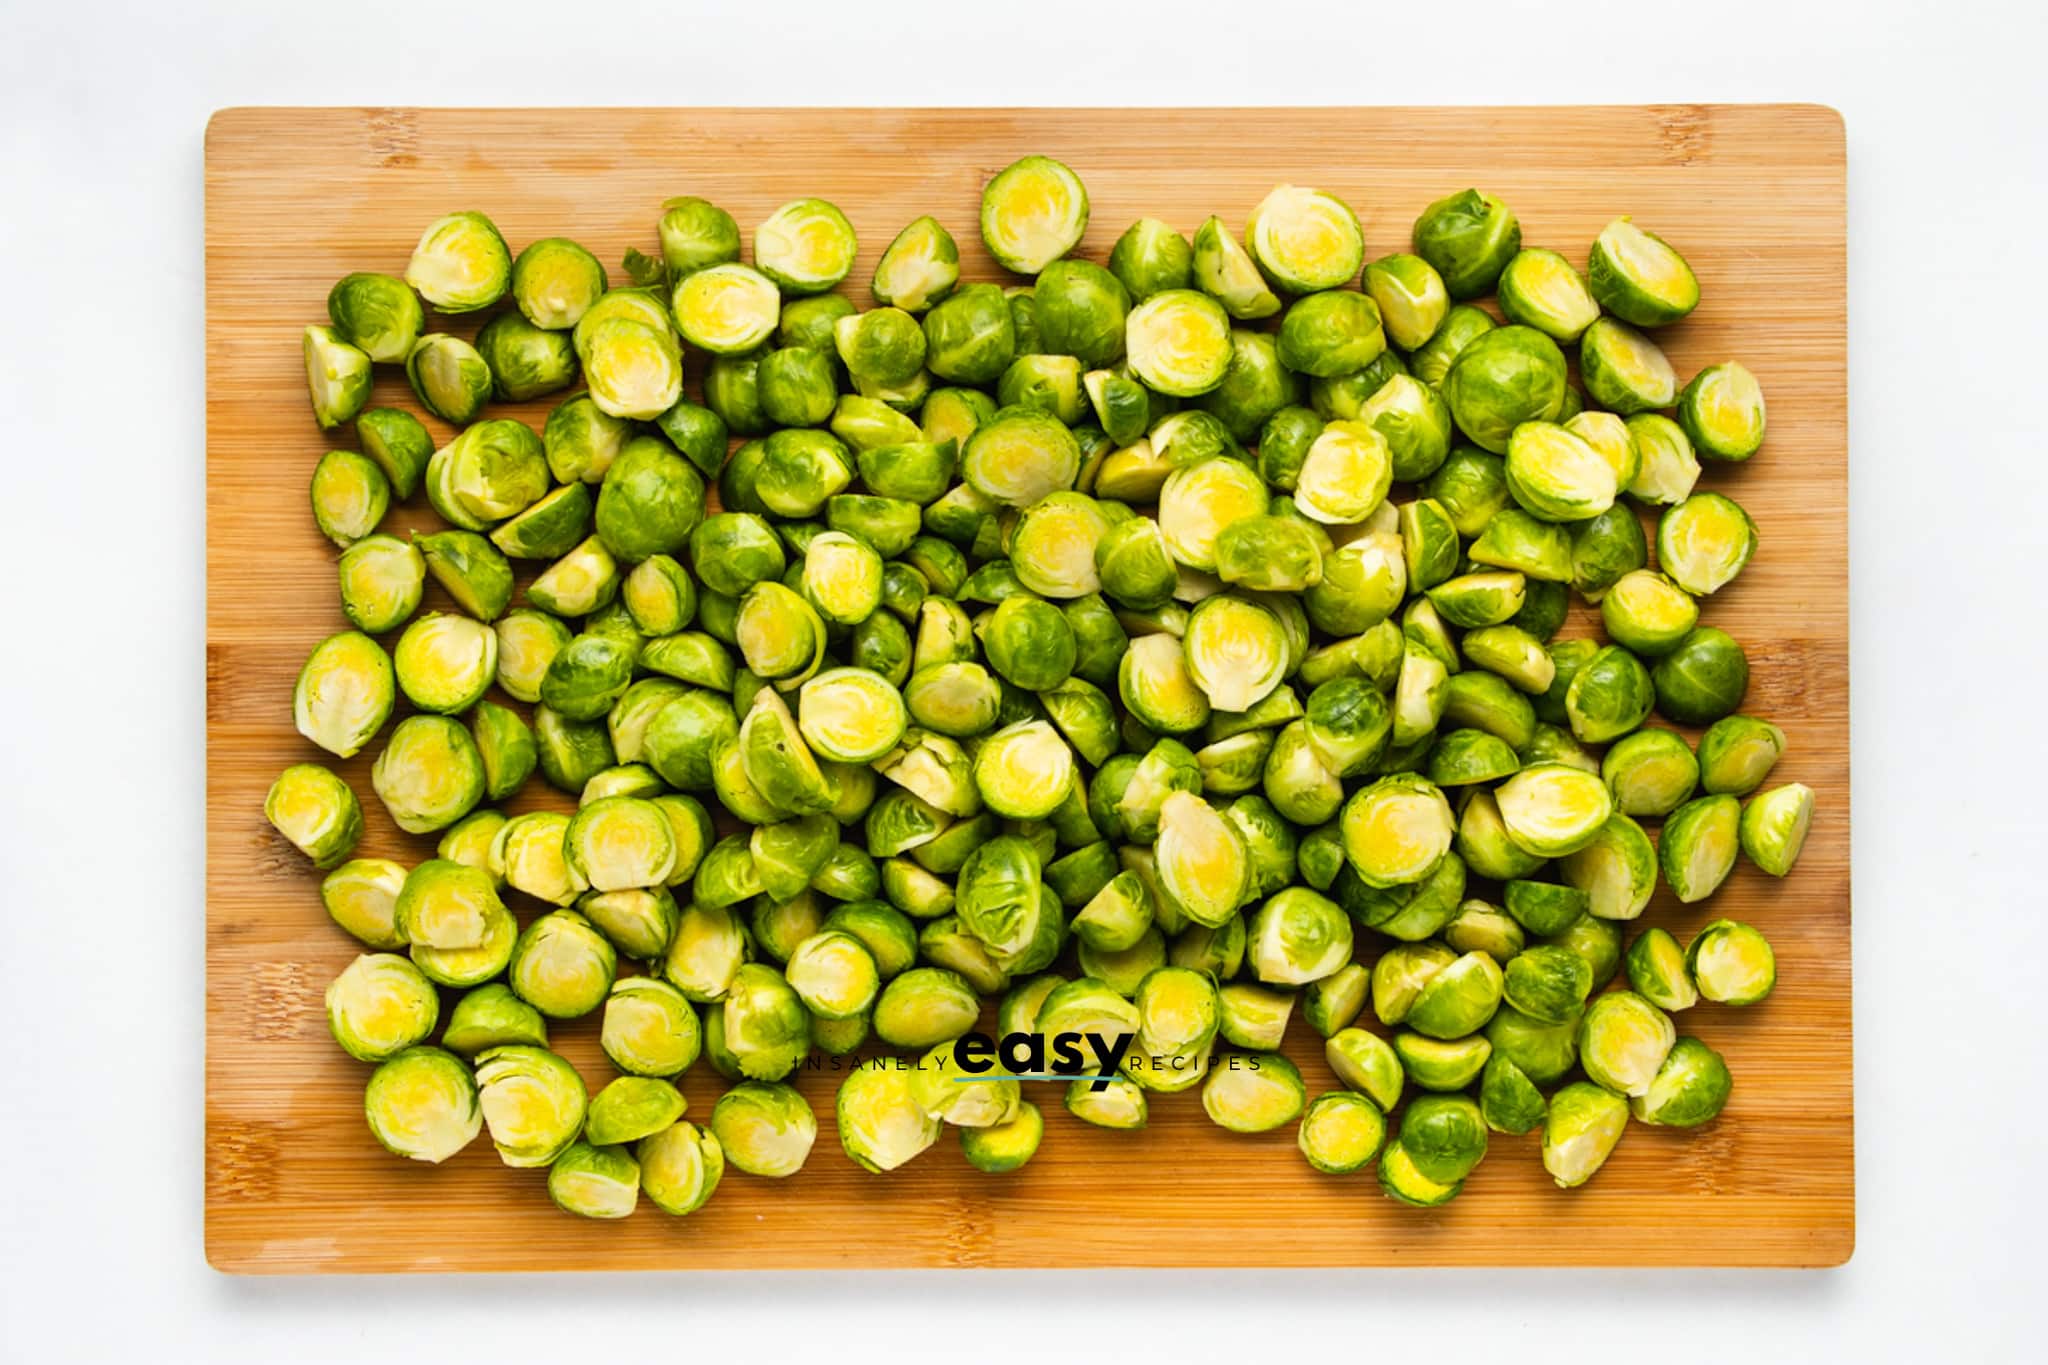 brussel sprouts trimmed and sliced on a wooden cutting board